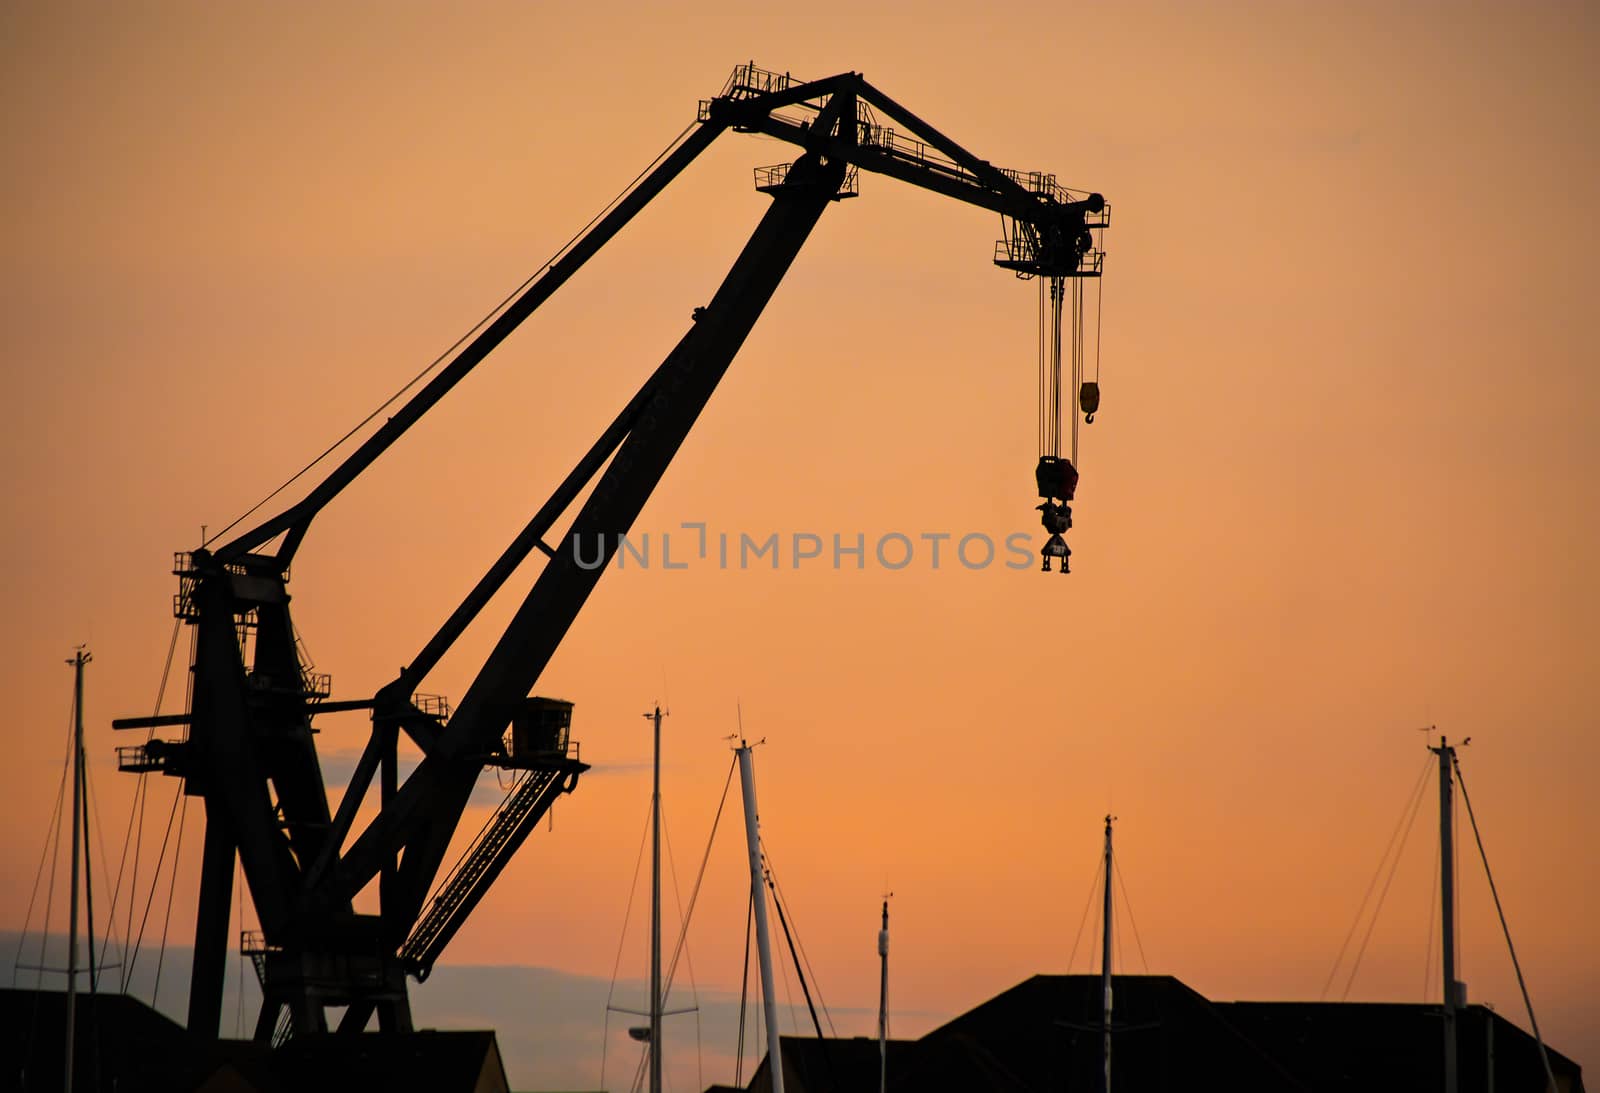 A dockside crane, silhouetted against the setting sun